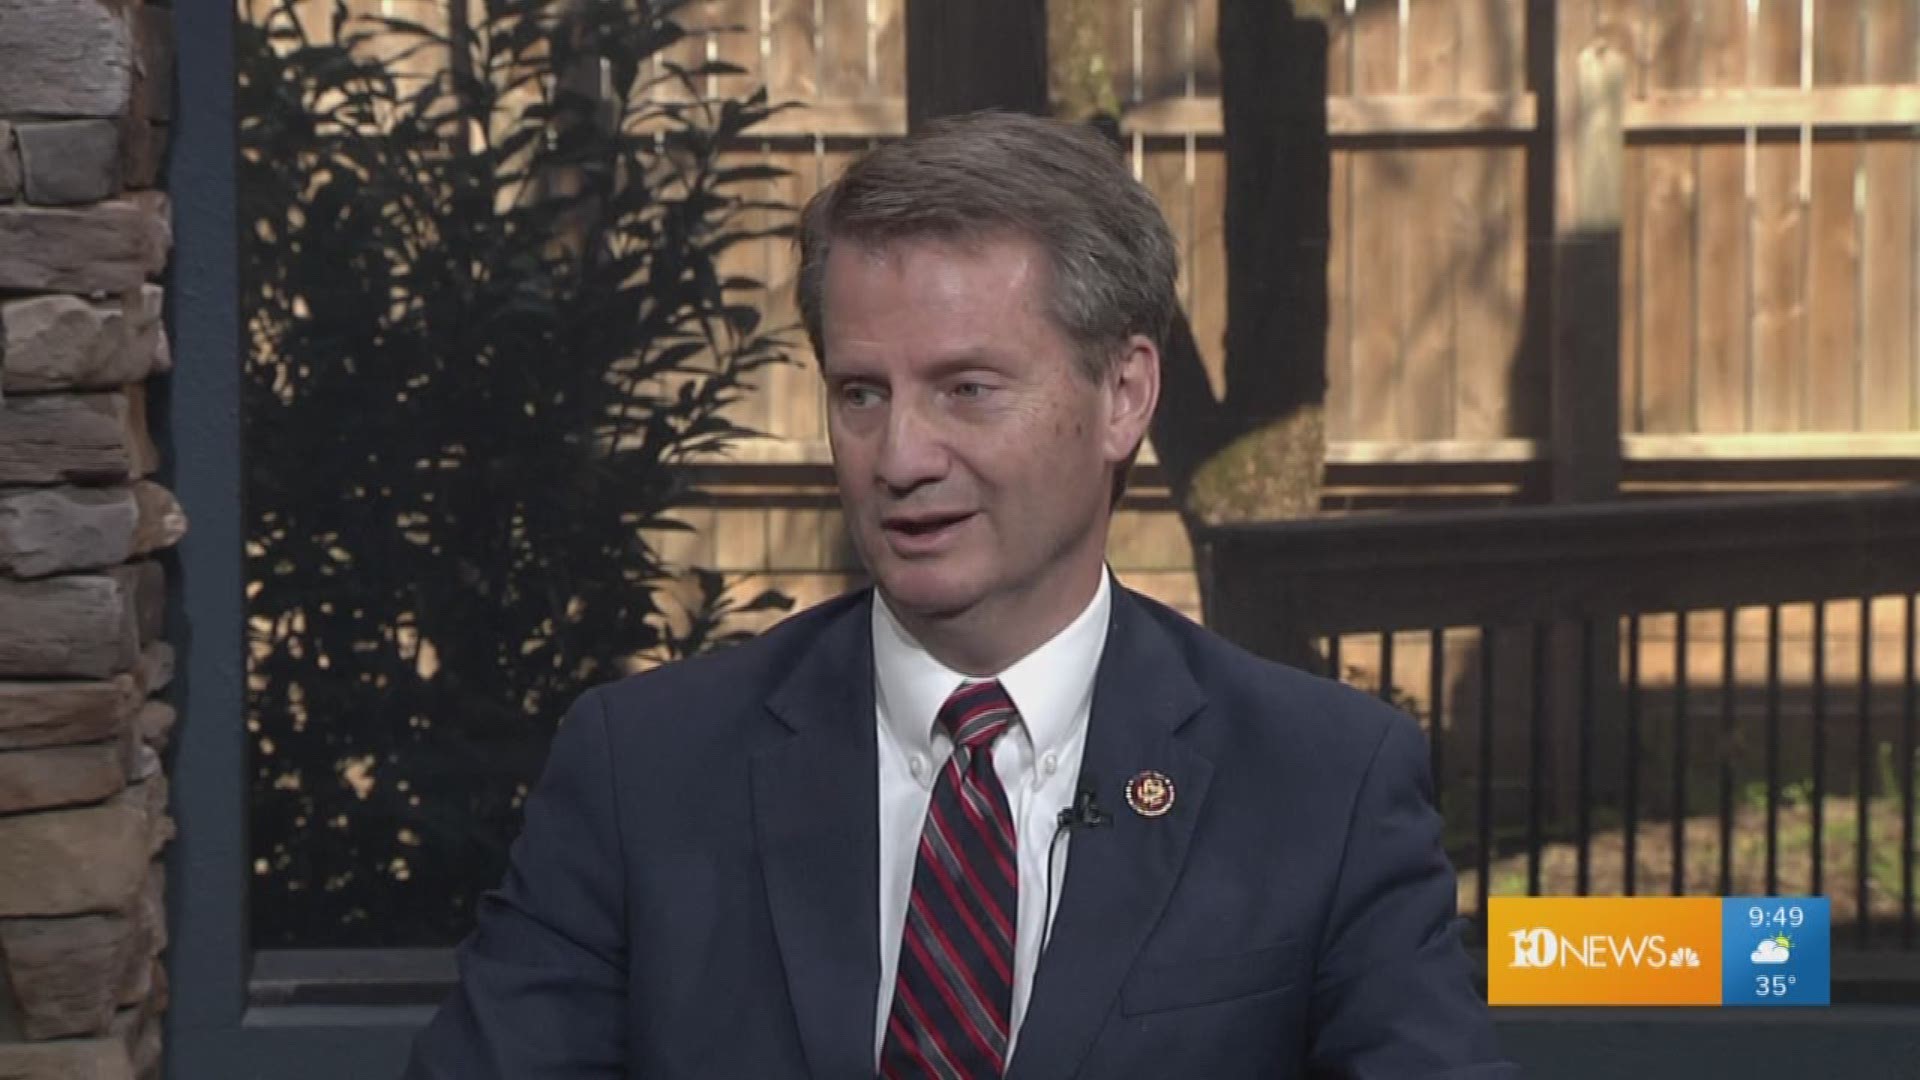 Rep. Burchett shares his thoughts about some of the legislation he has worked on so far, as well as his position on southern border security.